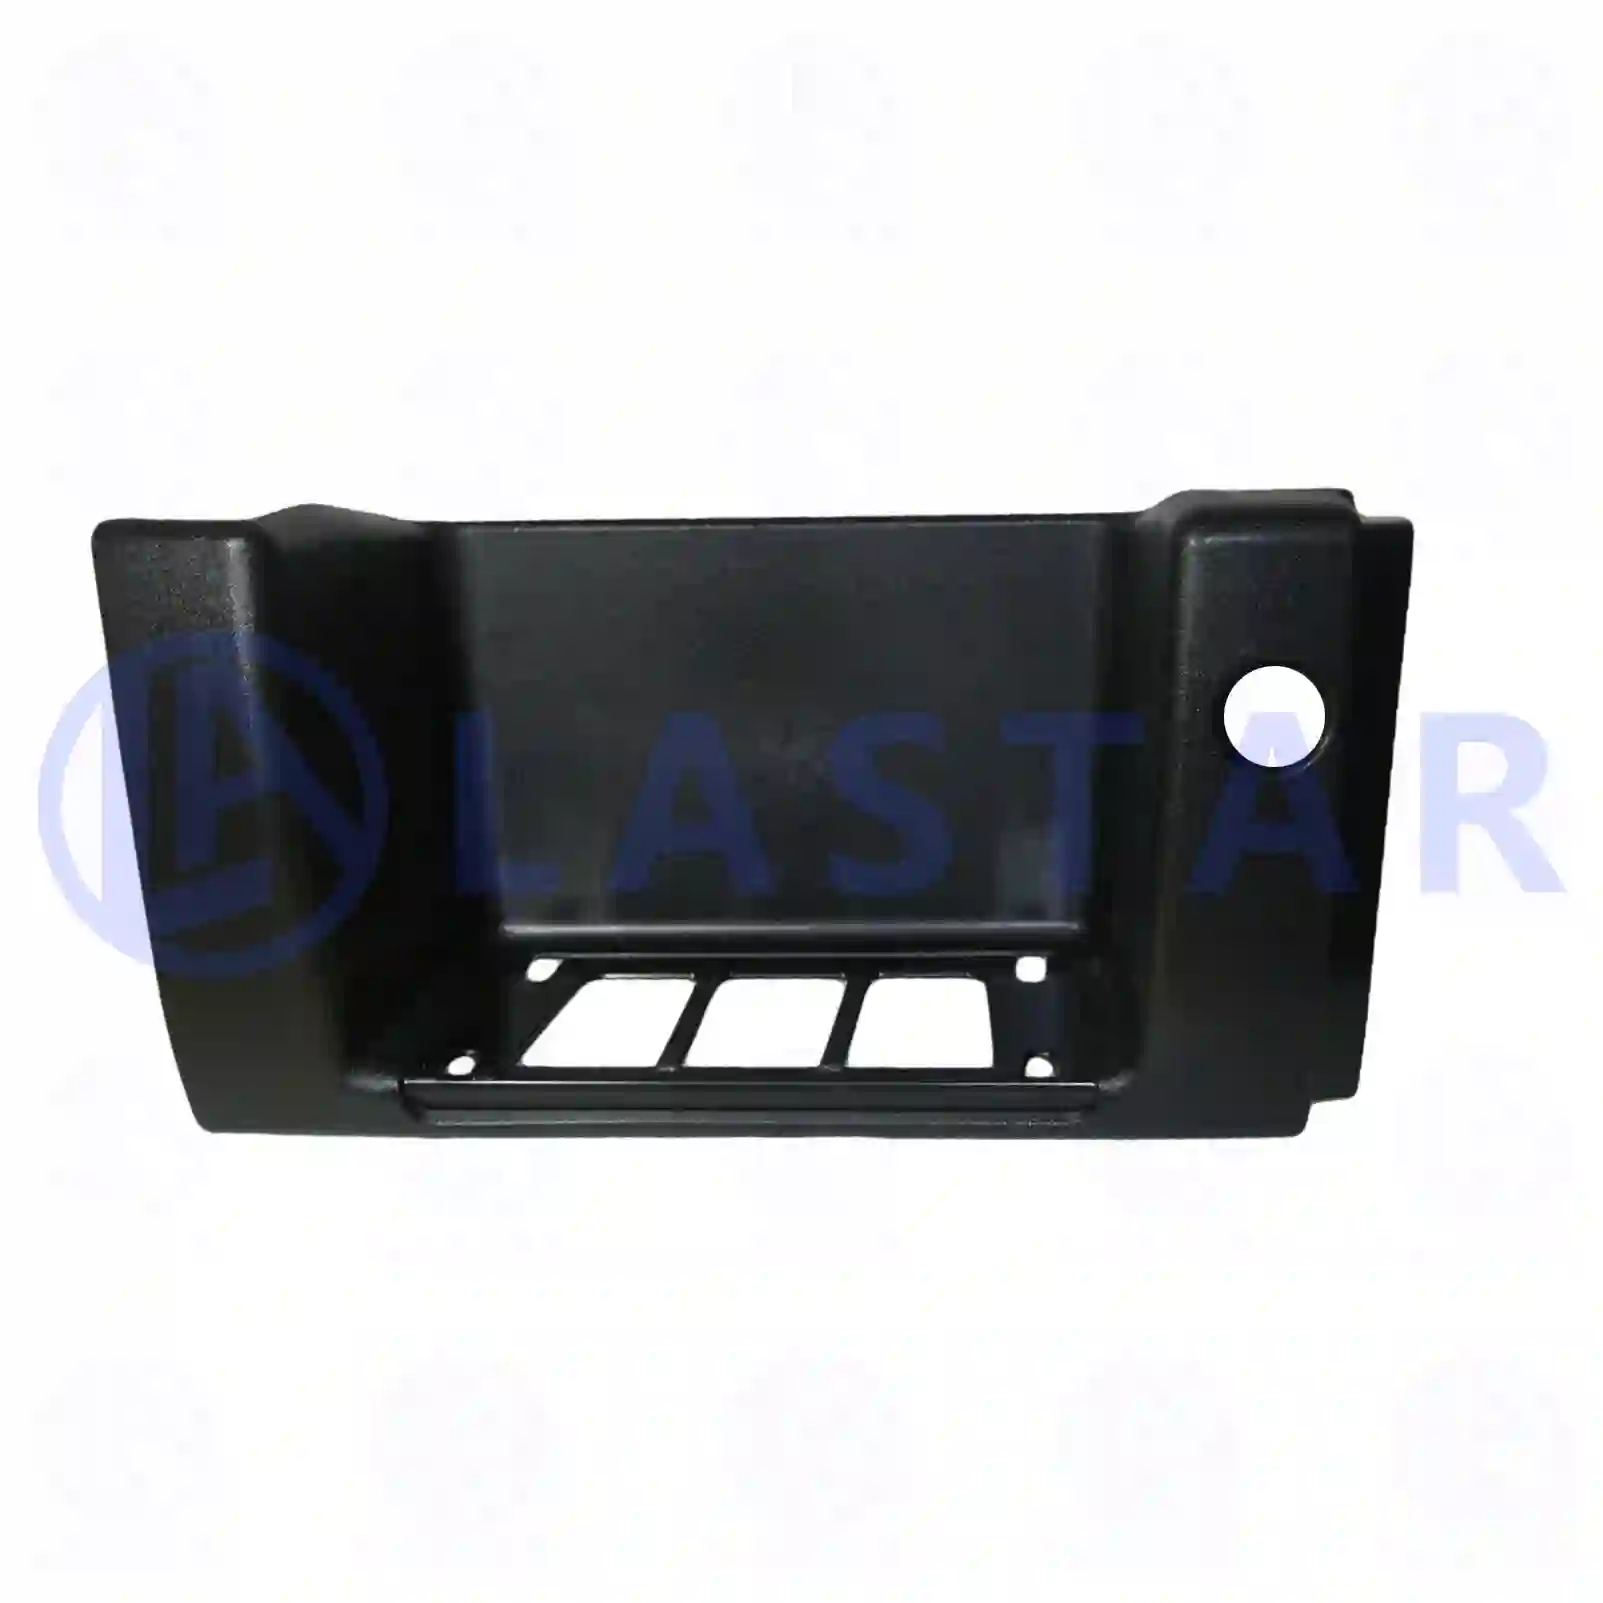 Step well case, right, 77717917, 8141004 ||  77717917 Lastar Spare Part | Truck Spare Parts, Auotomotive Spare Parts Step well case, right, 77717917, 8141004 ||  77717917 Lastar Spare Part | Truck Spare Parts, Auotomotive Spare Parts